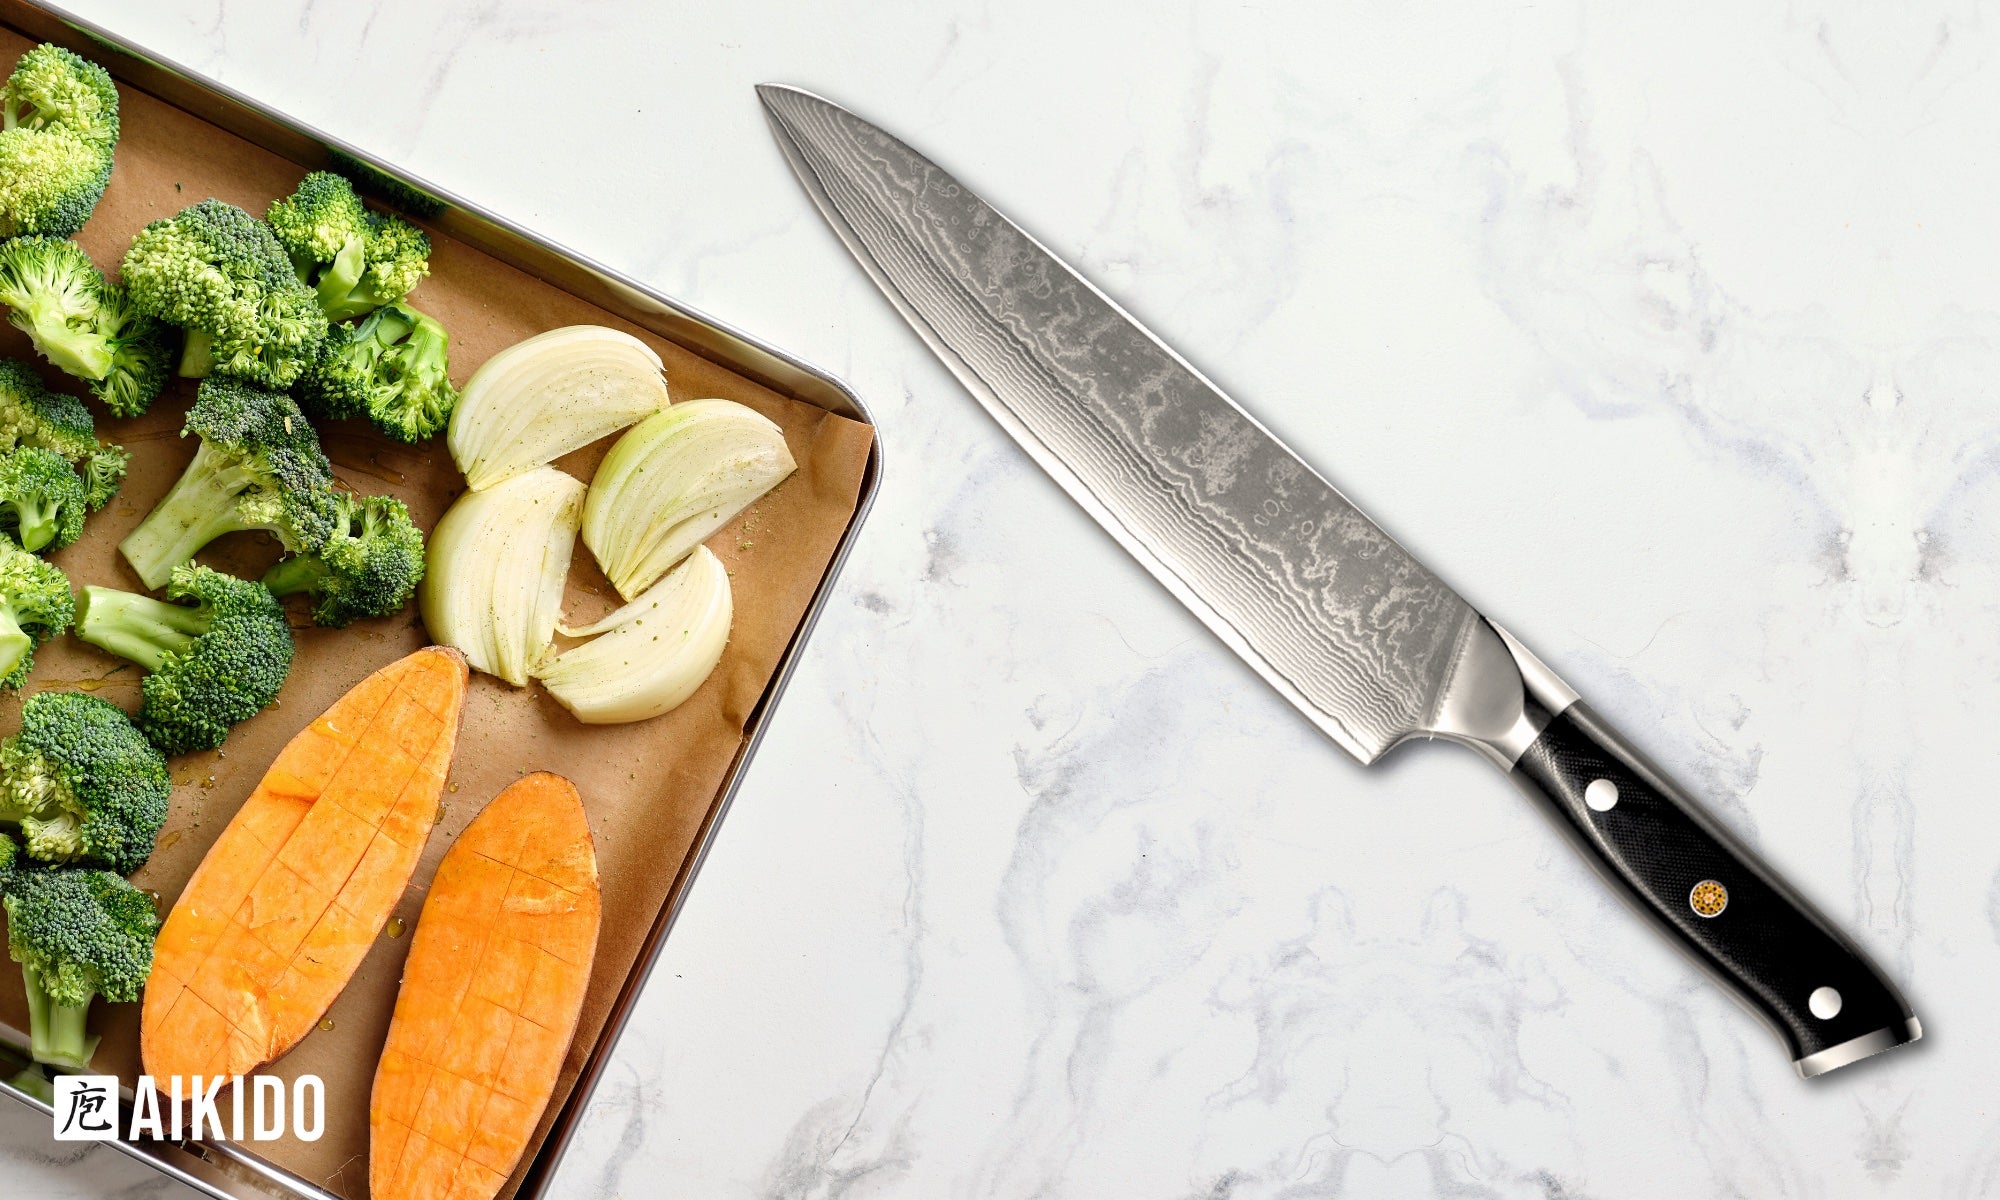 AIDEA Chef Knife - Professional Chef Knife-8 Inch, Japanese Steel